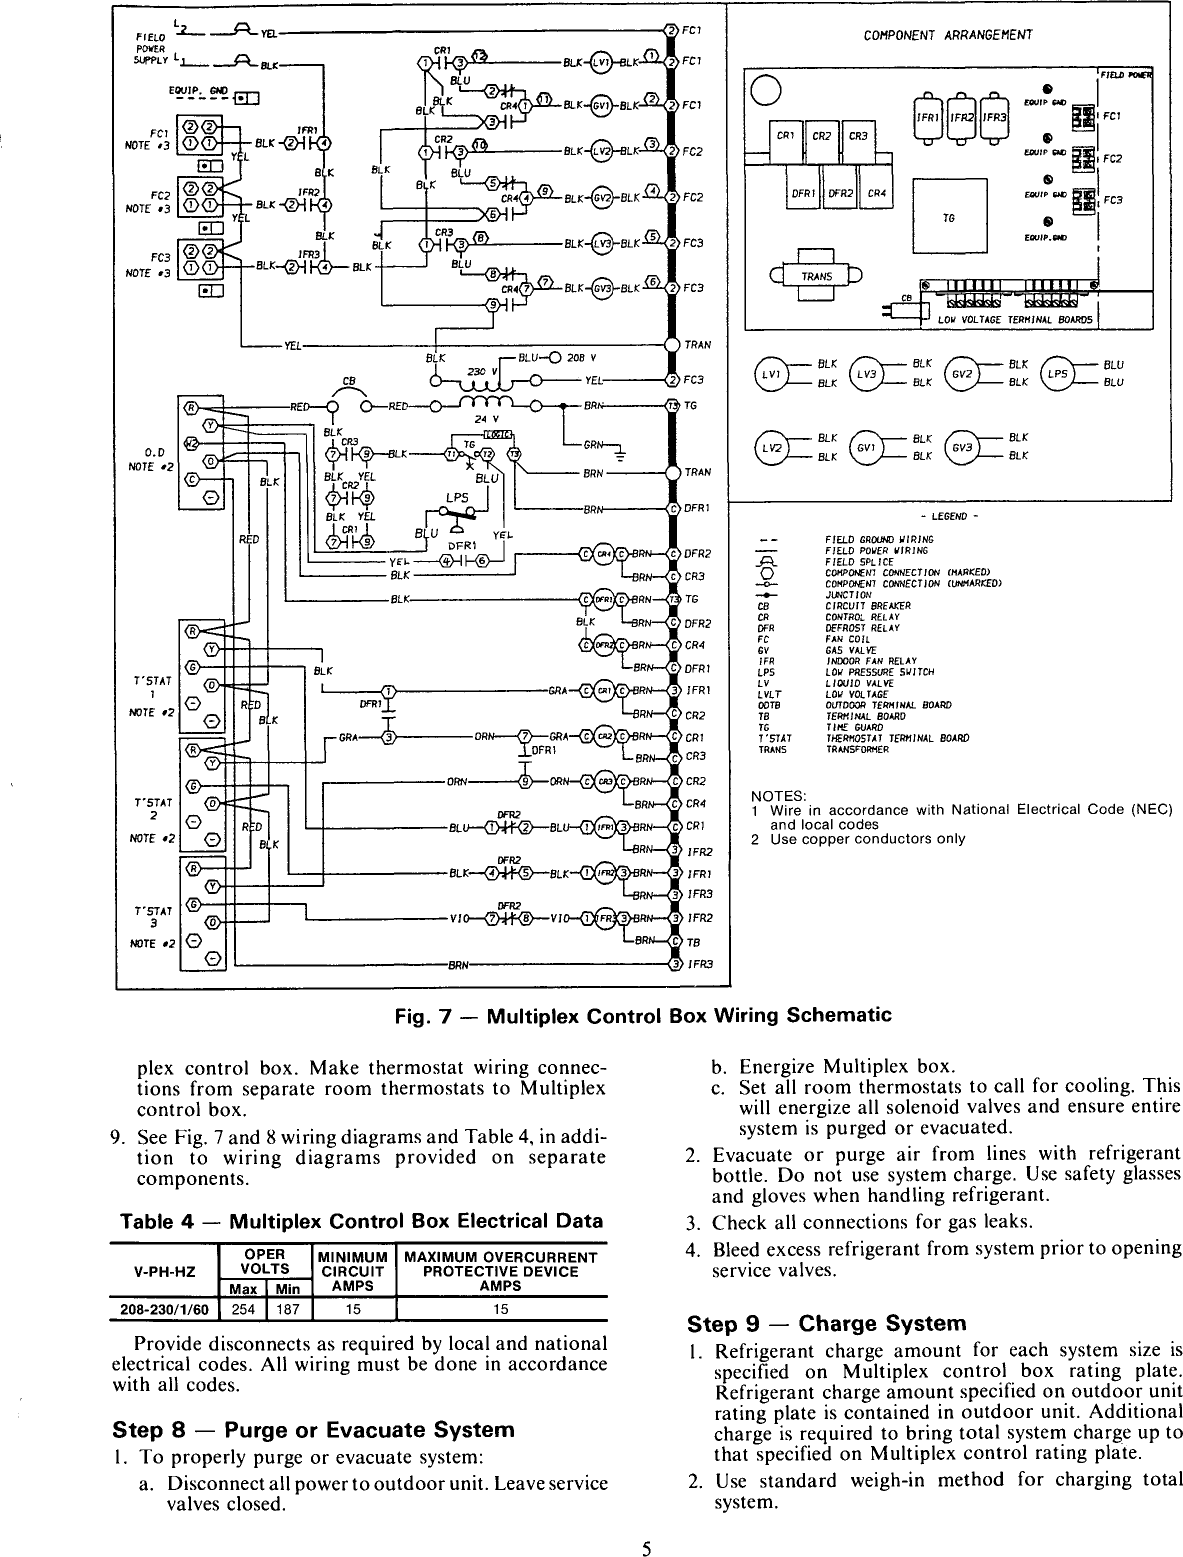 Page 5 of 8 - Carrier Carrier-Air-Cooled-Condensing-Unit-38Eh-Users-Manual-  Carrier-air-cooled-condensing-unit-38eh-users-manual